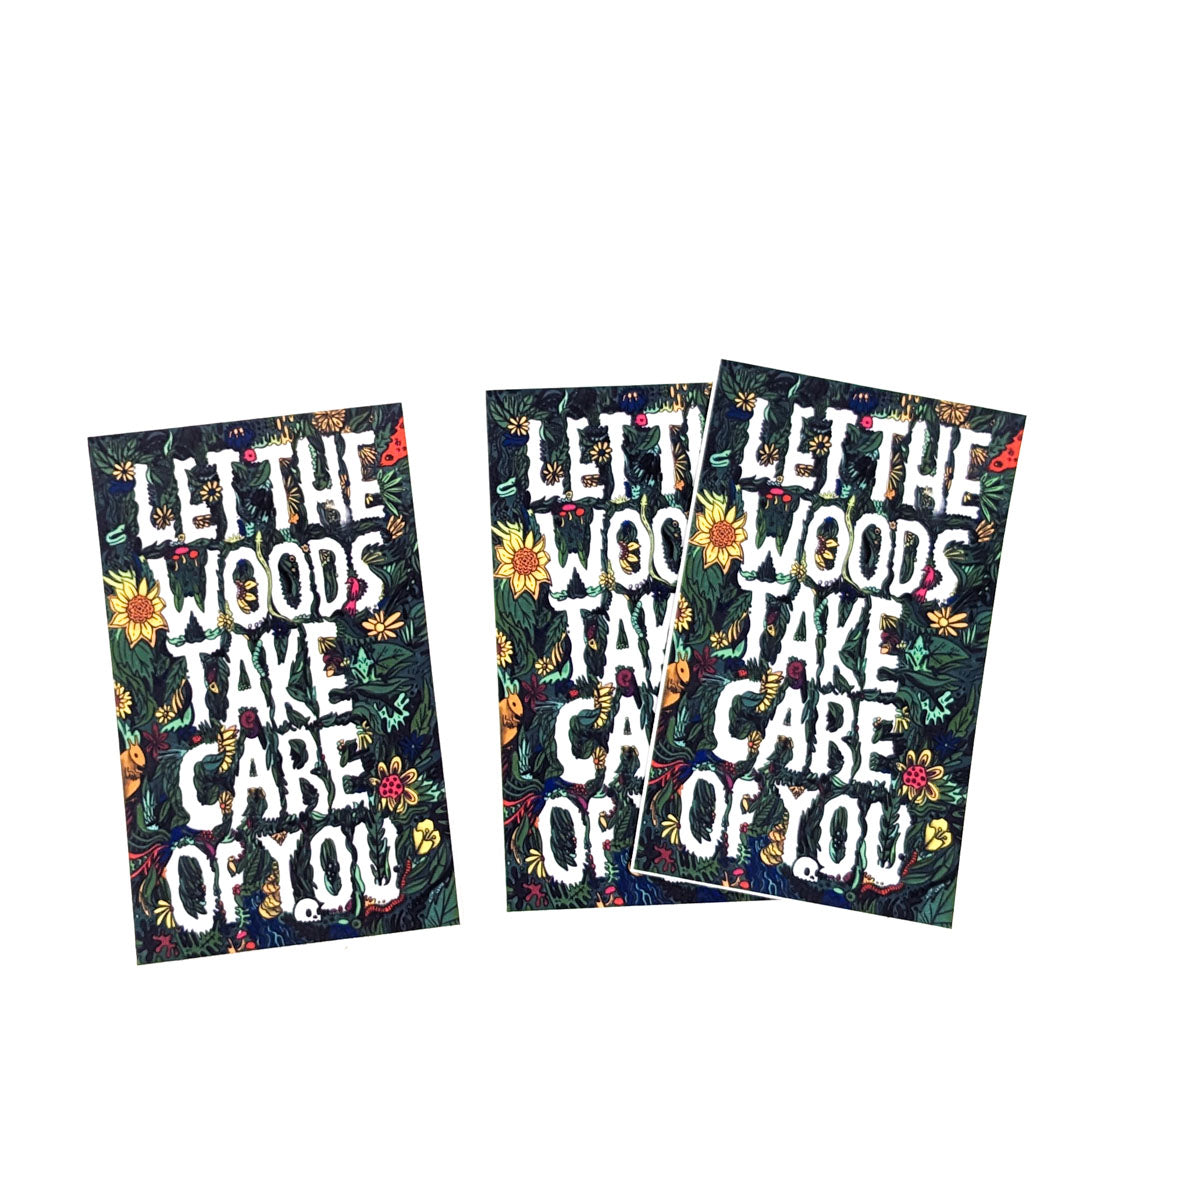 Let the Woods Take Care of You- Sticker